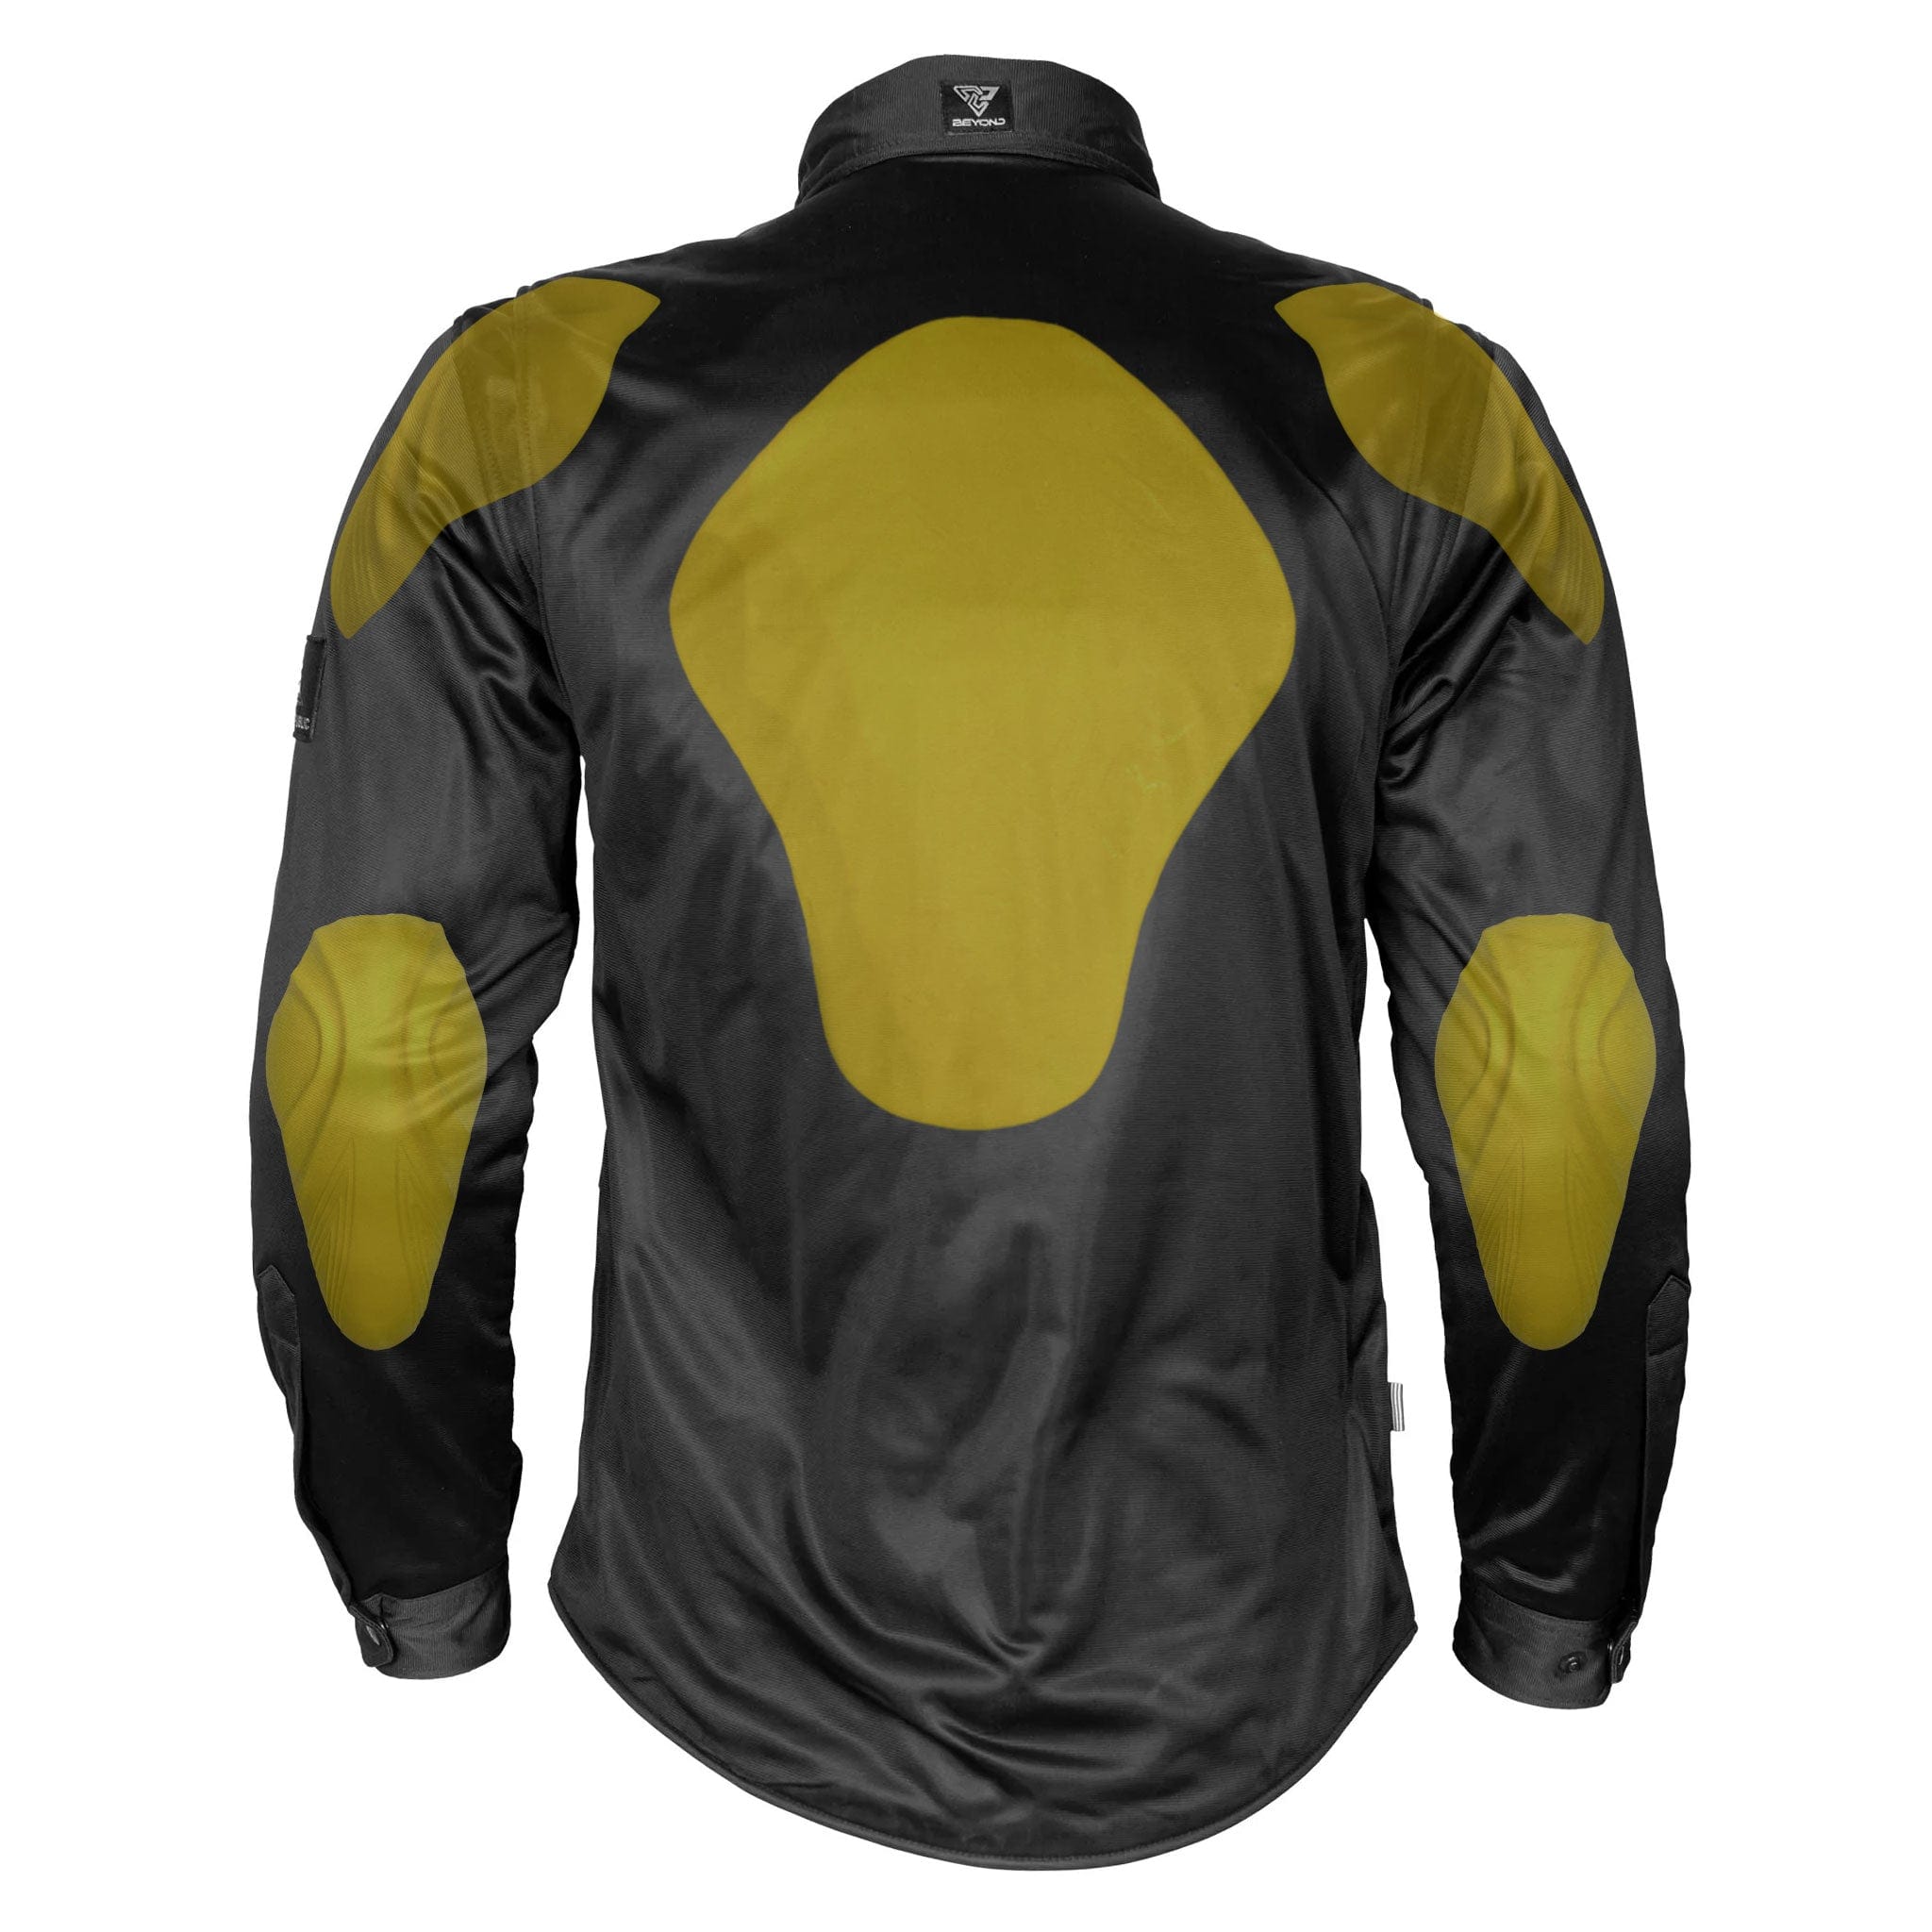 Ultra Protective Shirt - Black Solid